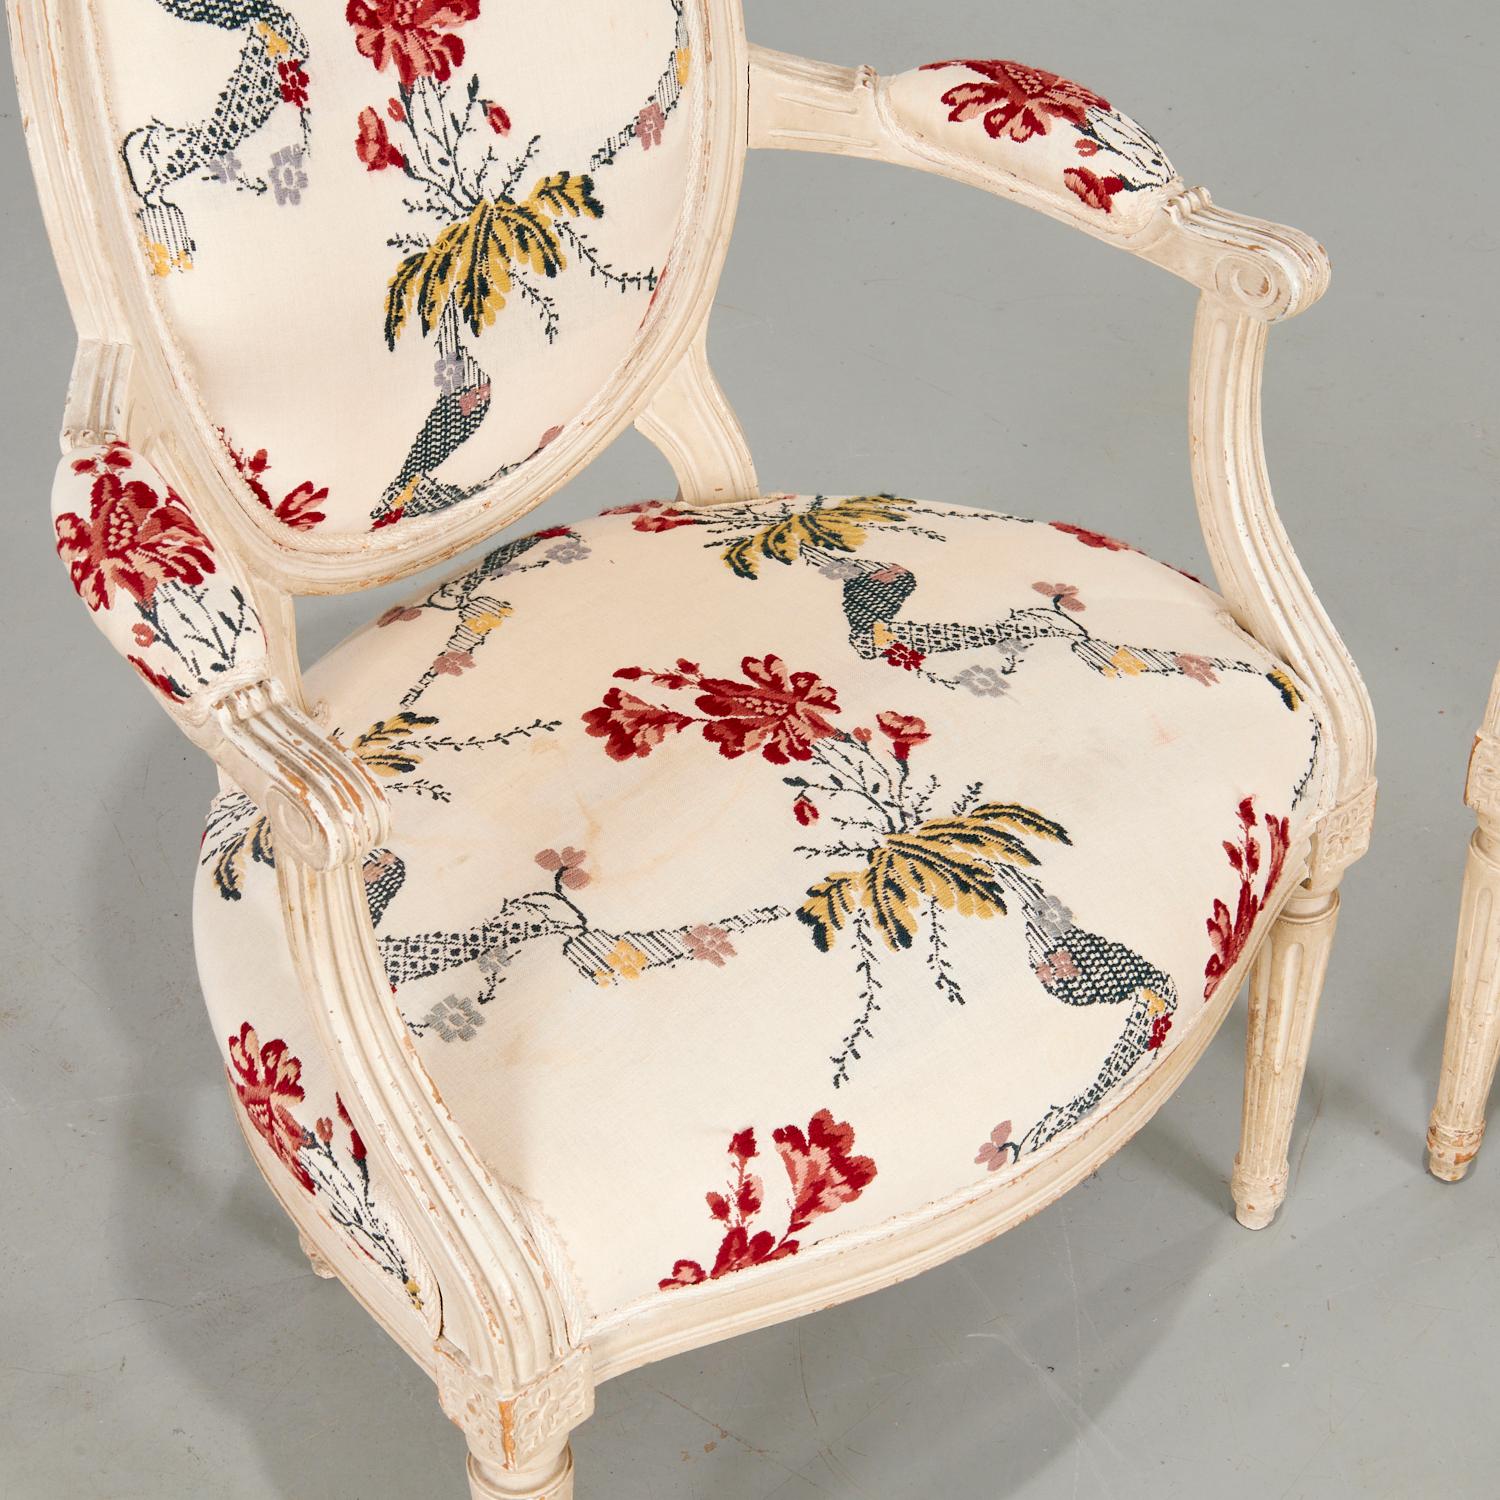 A pair of 19th C. Louis XVI style painted fauteuils with 20th c., floral needlework  upholstery on the seat, seatback and arm rests. The back of the chair is upholstered in a complementary checkered fabric.

There is a  